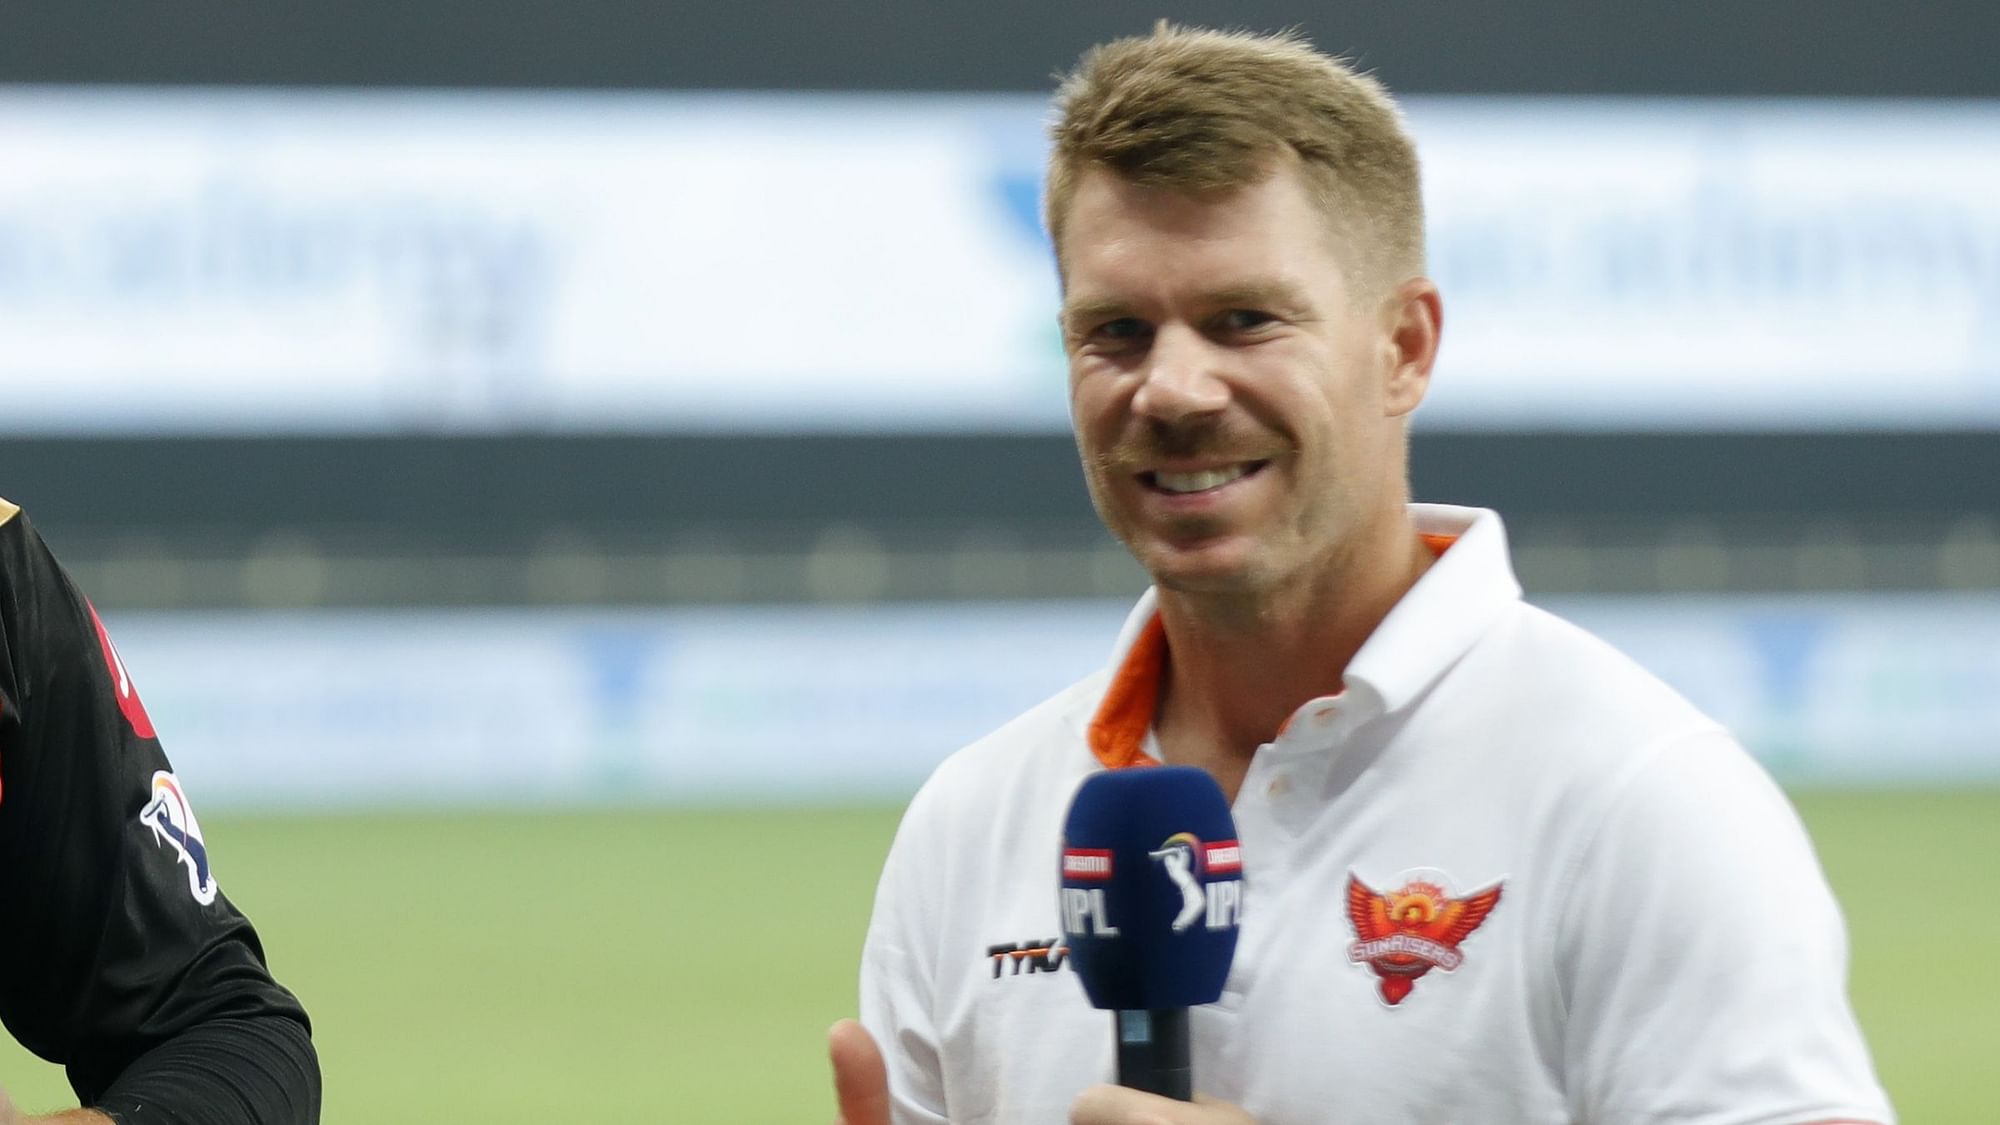 Fans react as David Warner posts a video of himself farting into a mic before an interview.